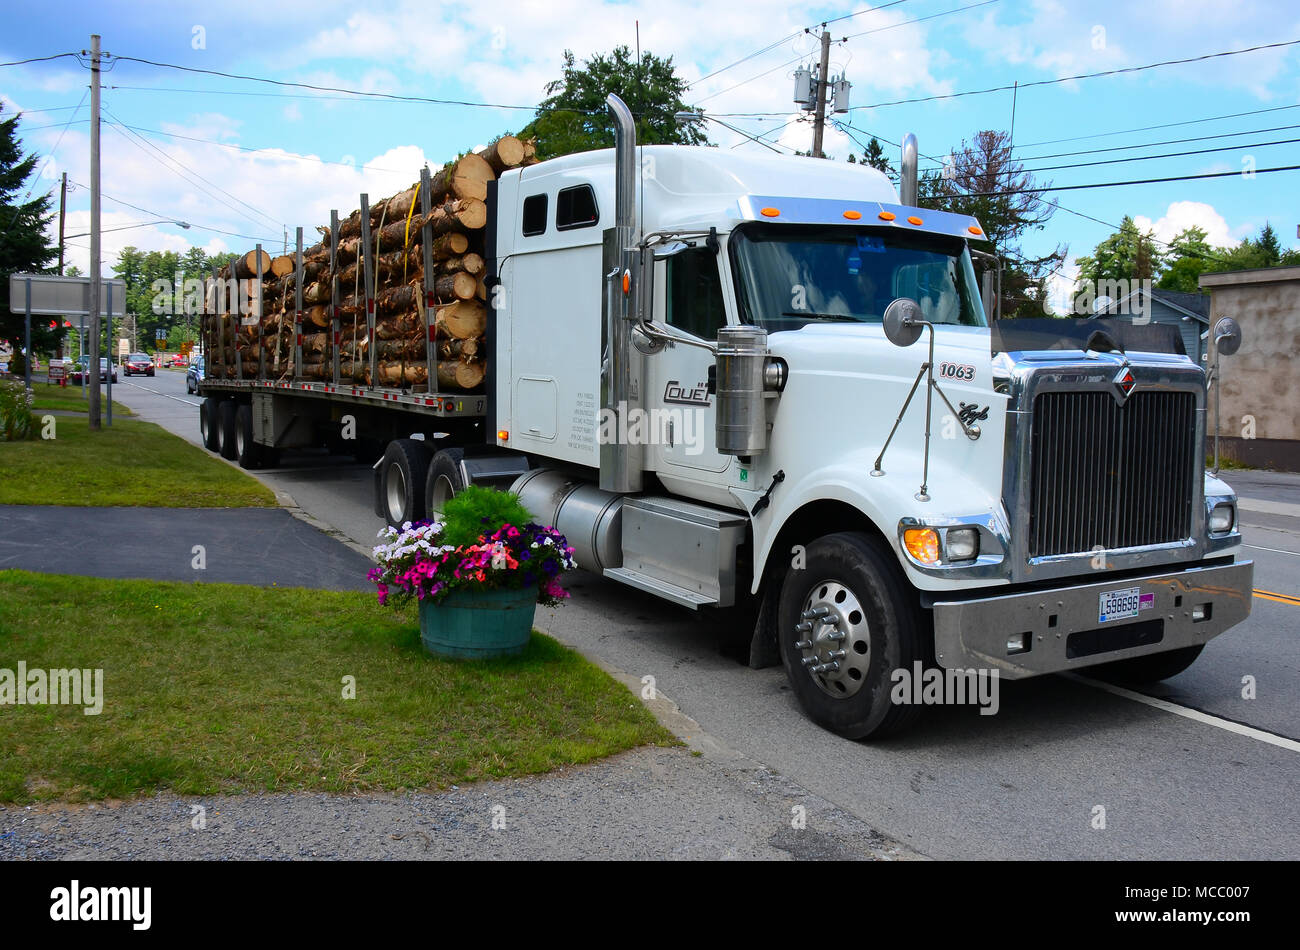 A Quebec Canada licensed tractor trailer, or lorry, loaded with logs parked in front of and blocking driveways in Speculator, NY USA Stock Photo